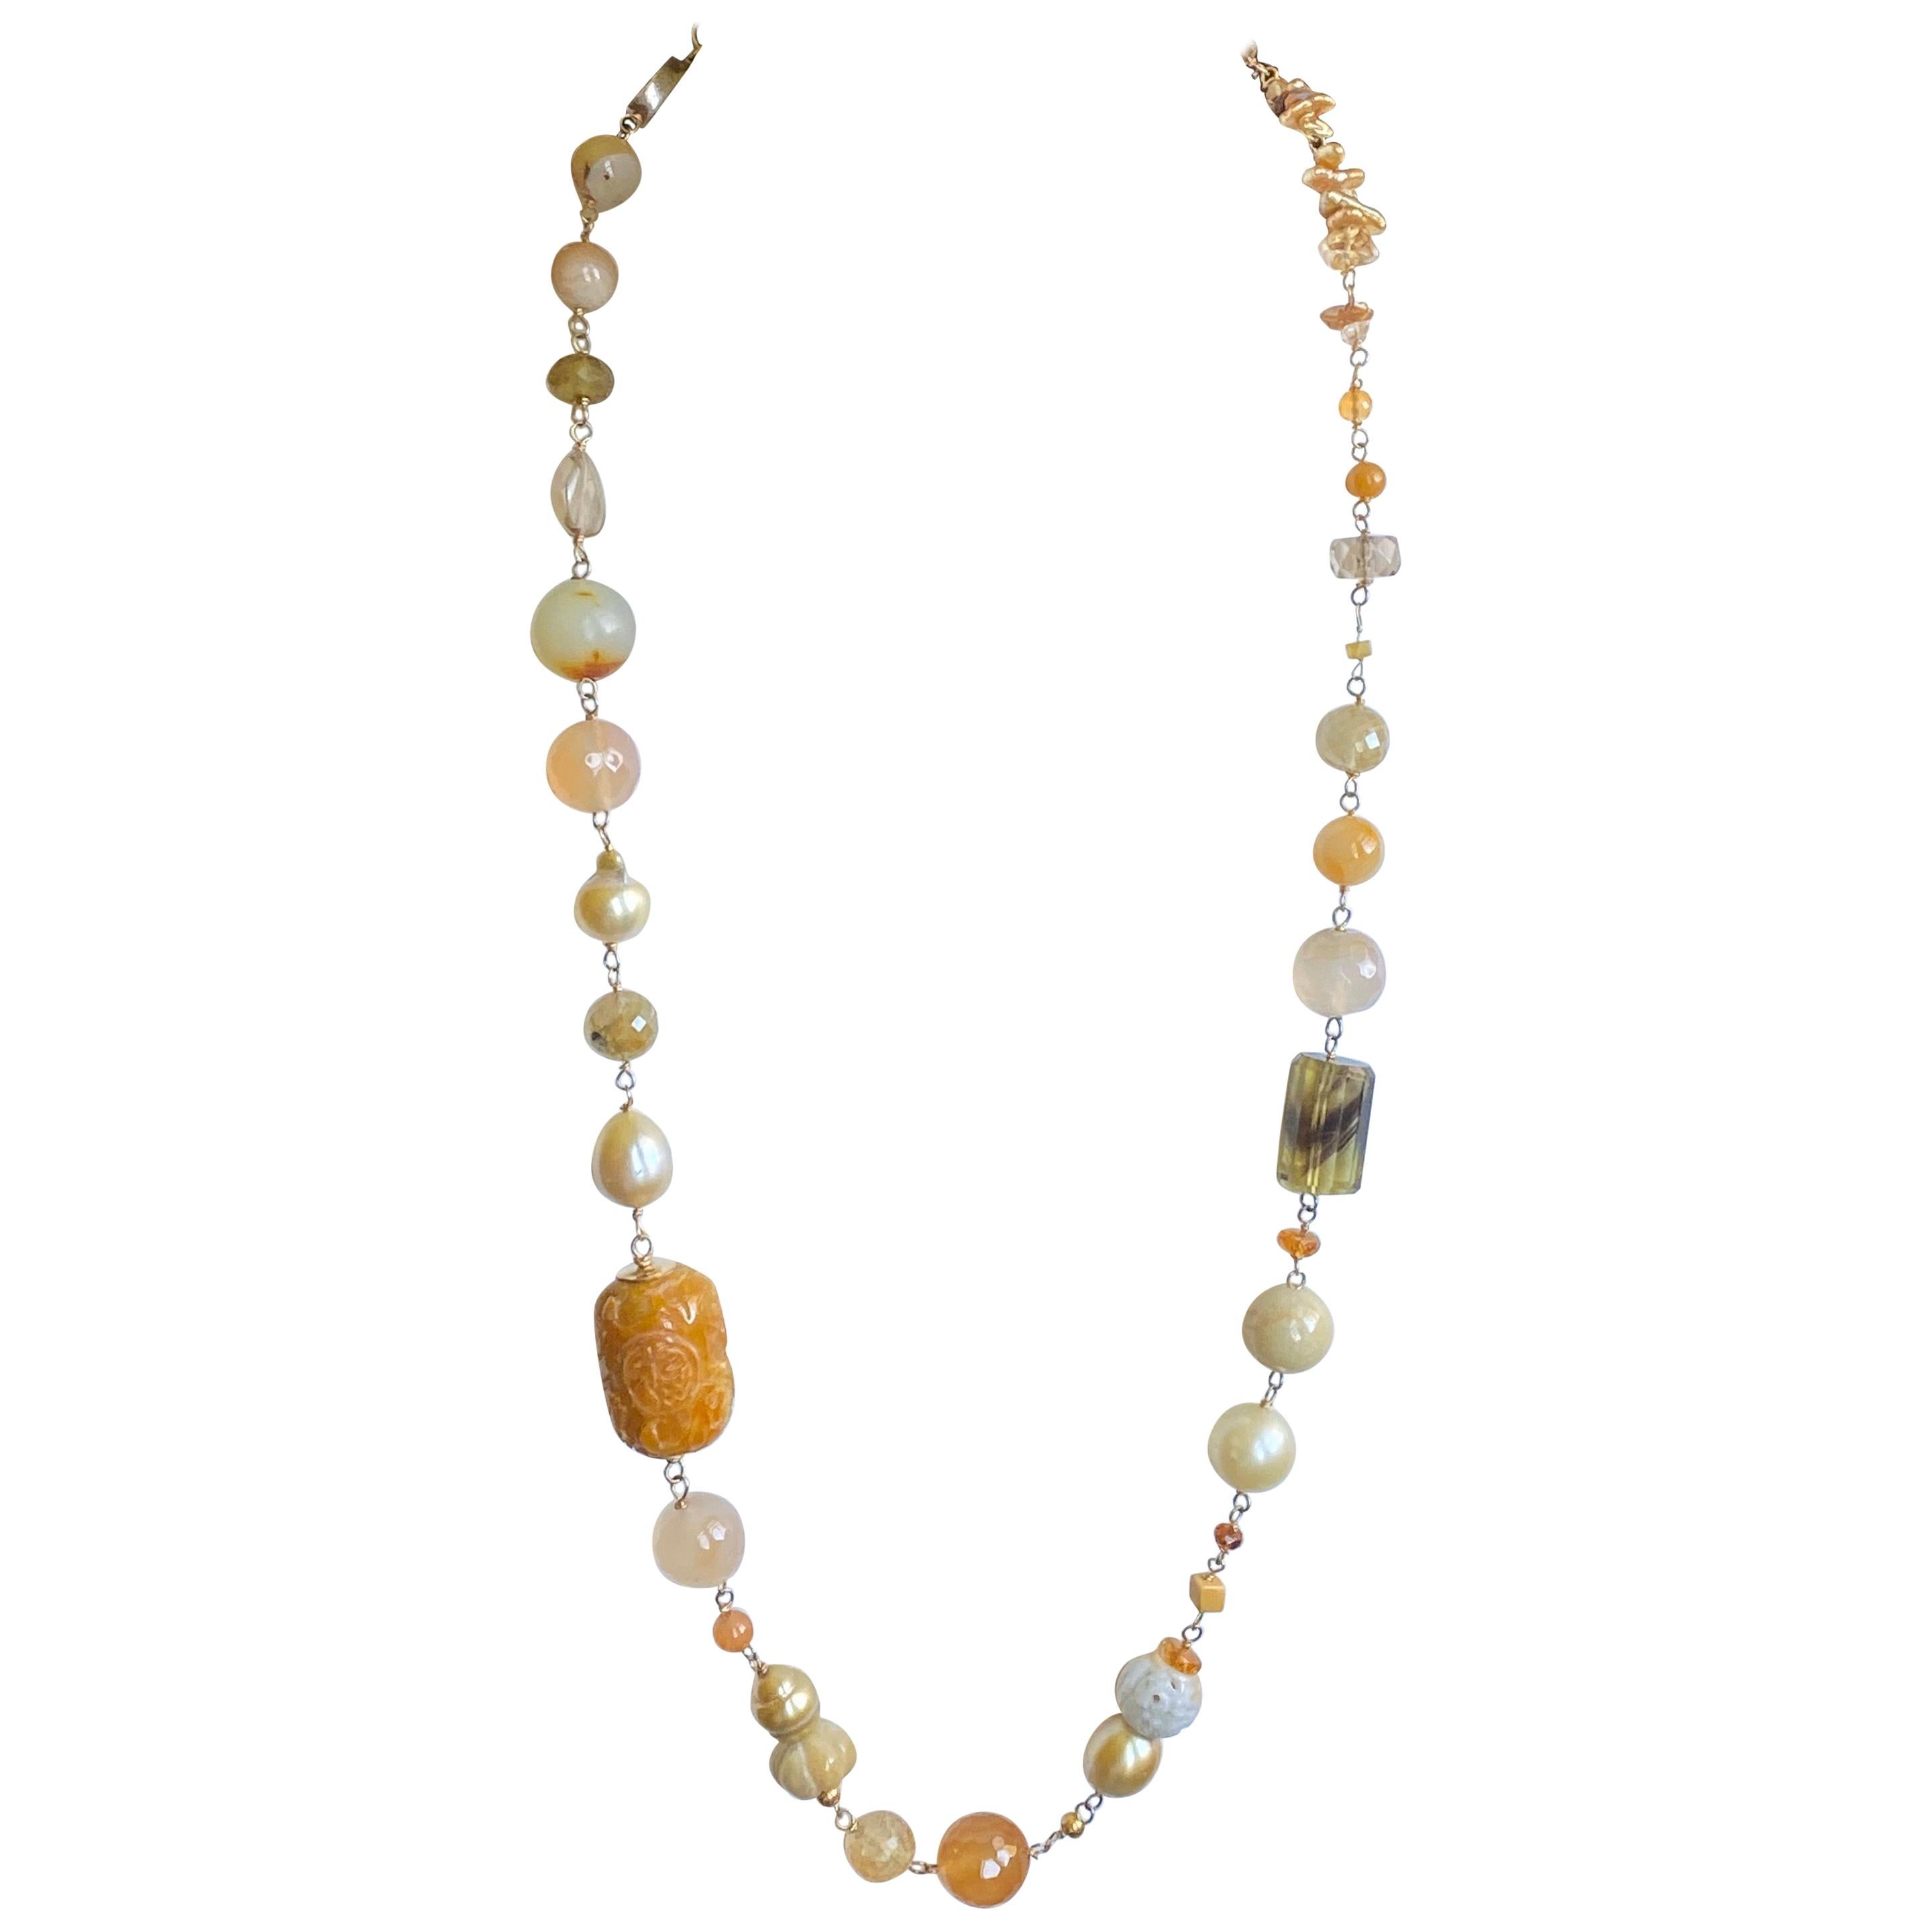 Golden South Sea Pearls, Honey Carved Jade, Bohemian Chic 18 Karat Gold Necklace For Sale